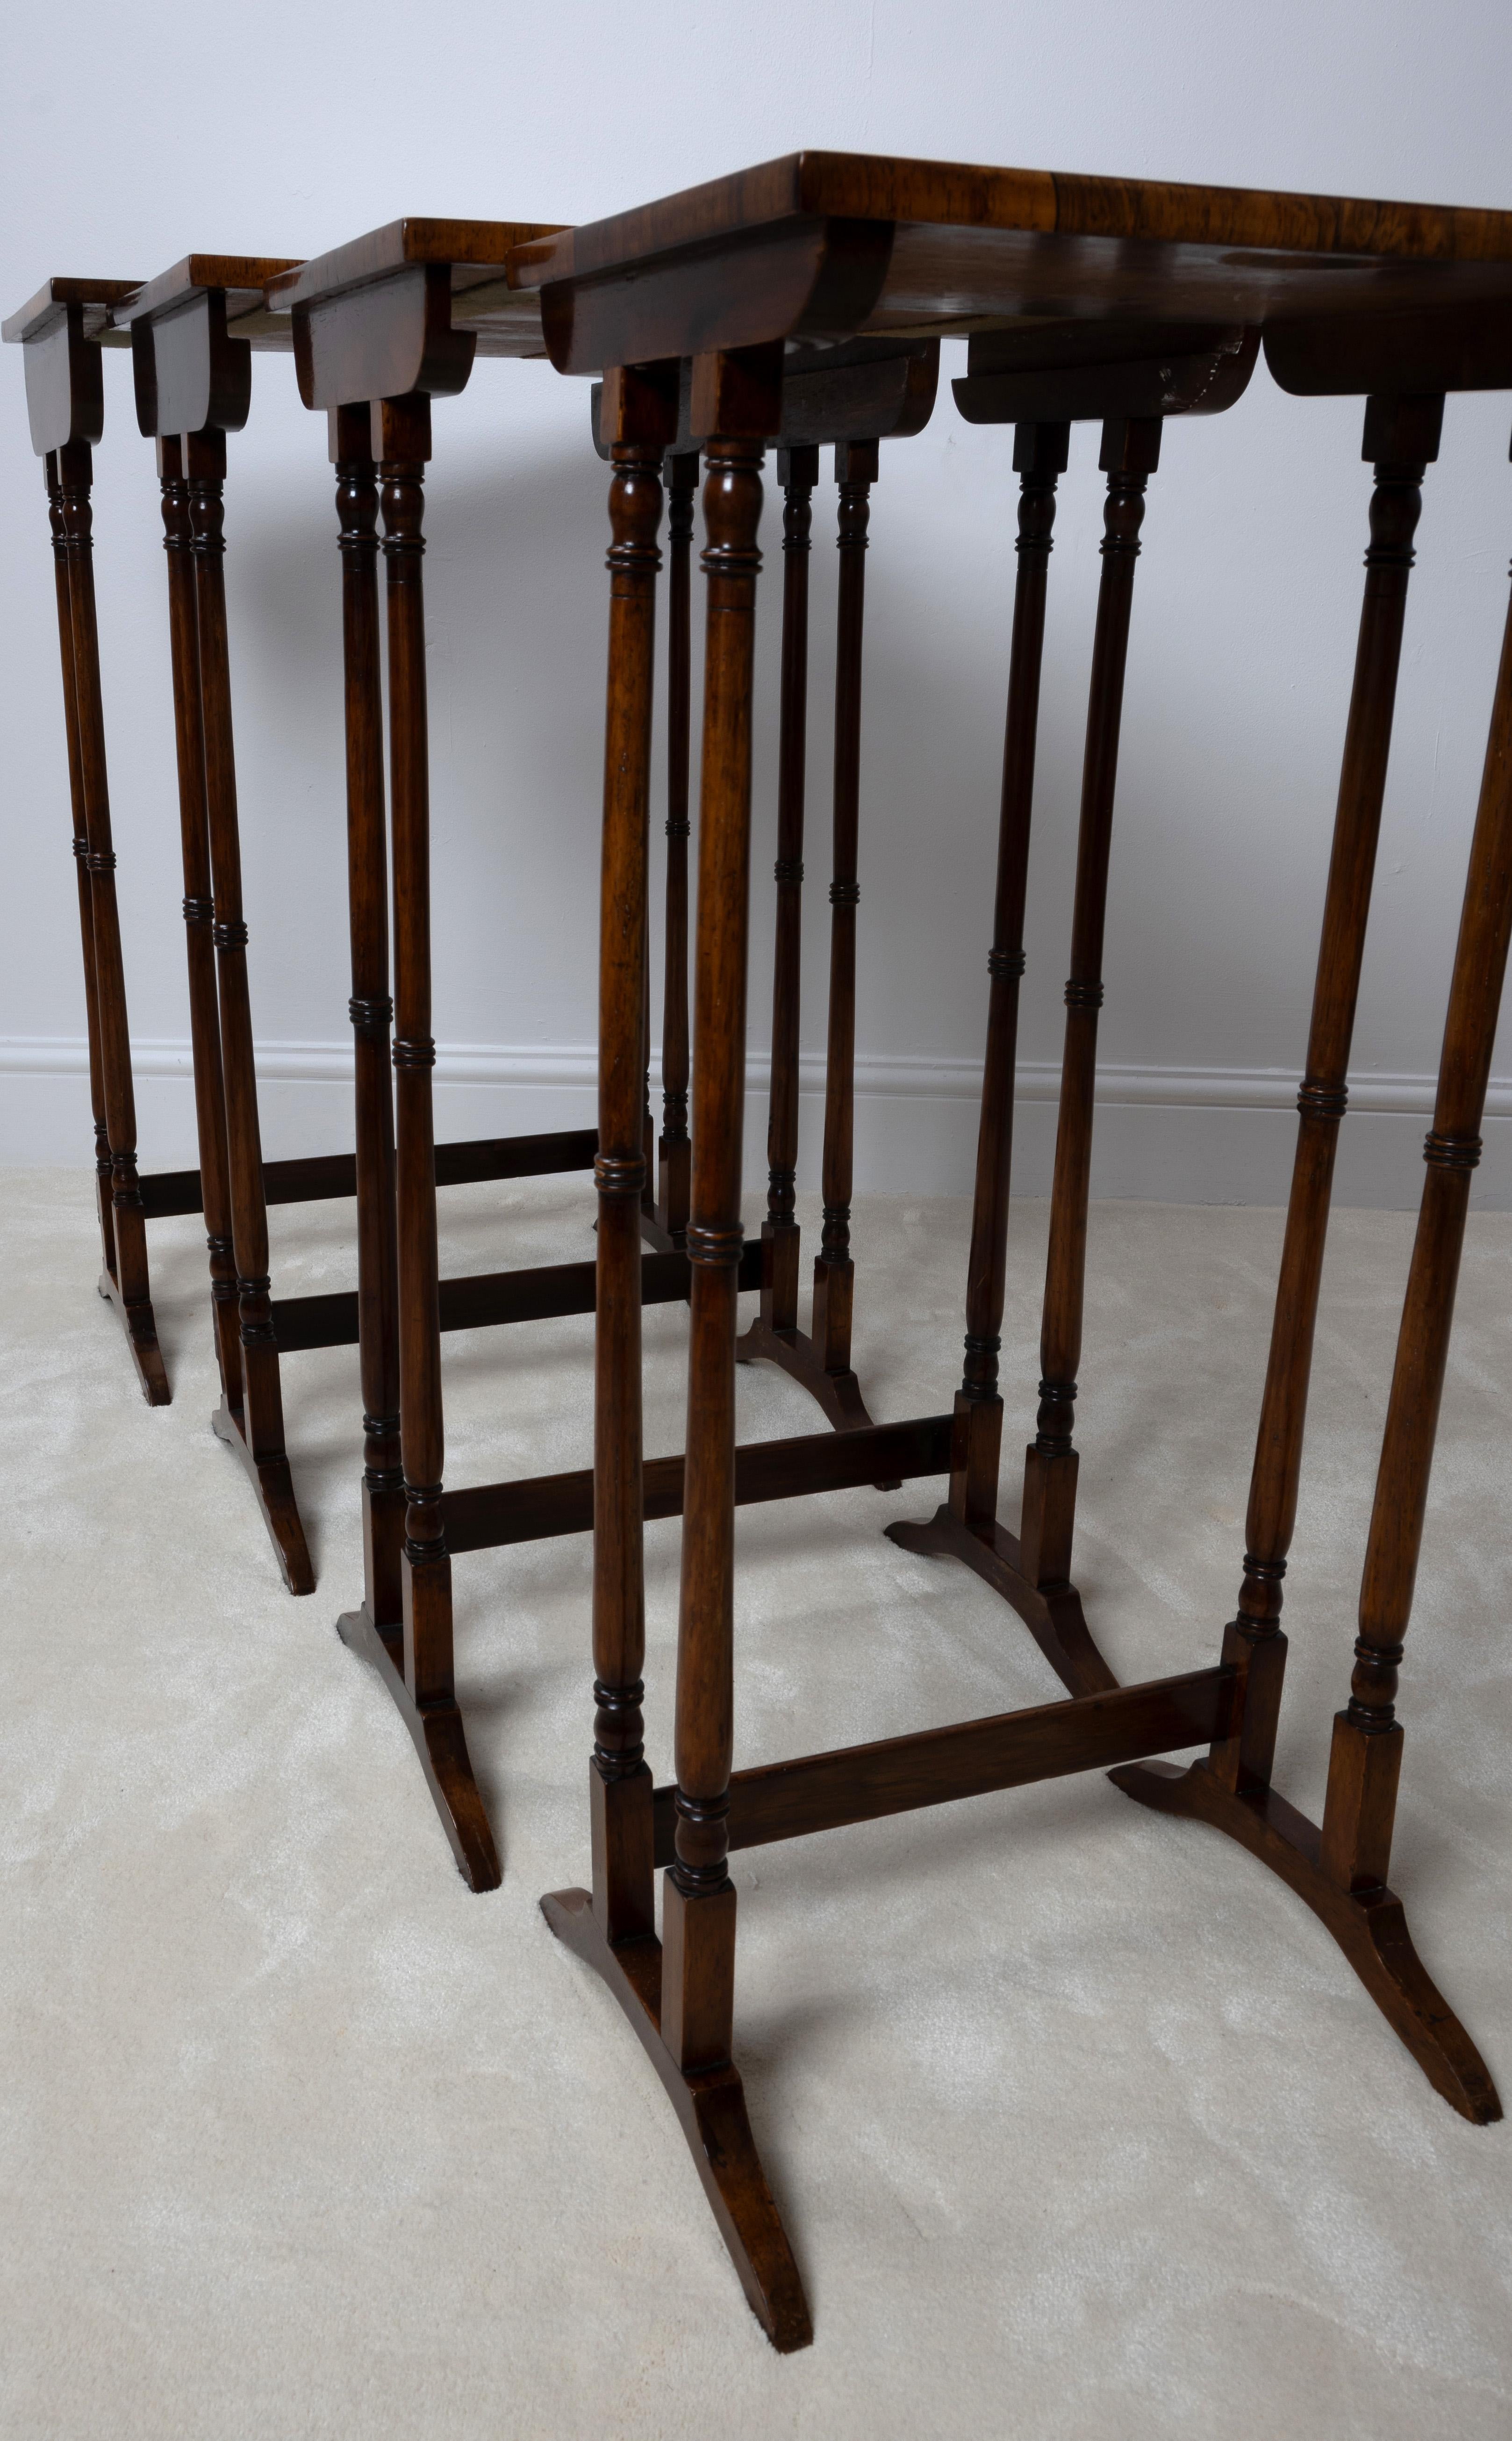 Antique English Regency Revival Rosewood Quartetto Of Nesting Table C.1820 For Sale 5